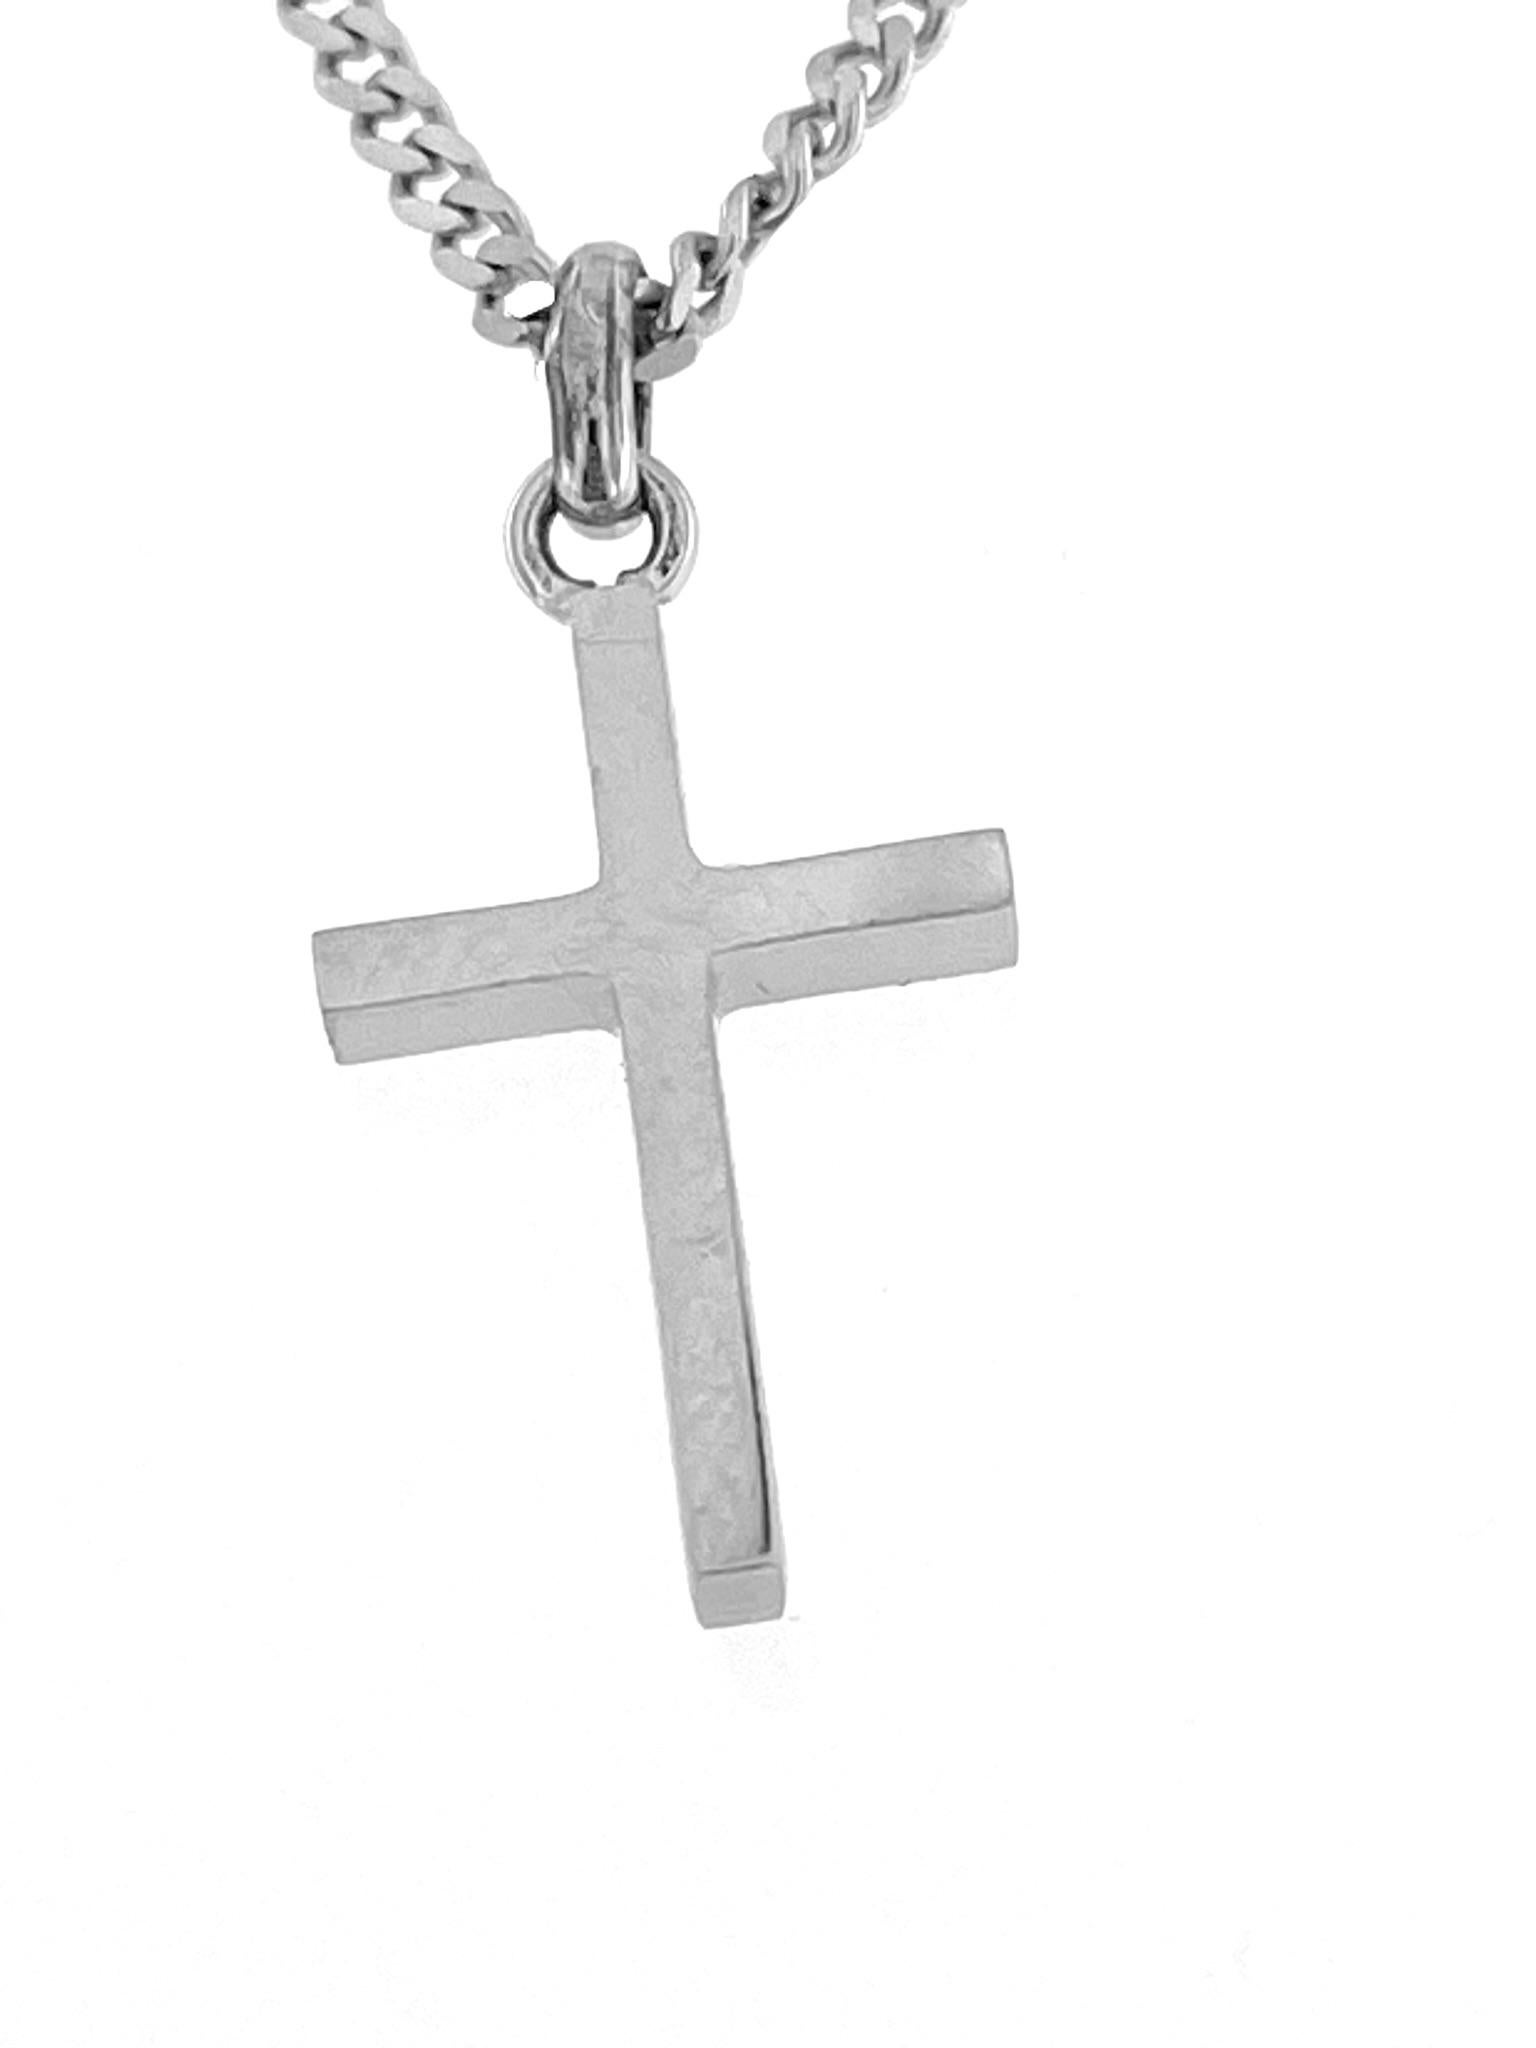 The Italian 18-karat White Gold Cross with Chain by Chini is an exquisite piece of religious jewelry crafted with precision and artistry. This cross necklace is designed and produced by Chini, an Italian jewelry brand known for its fine